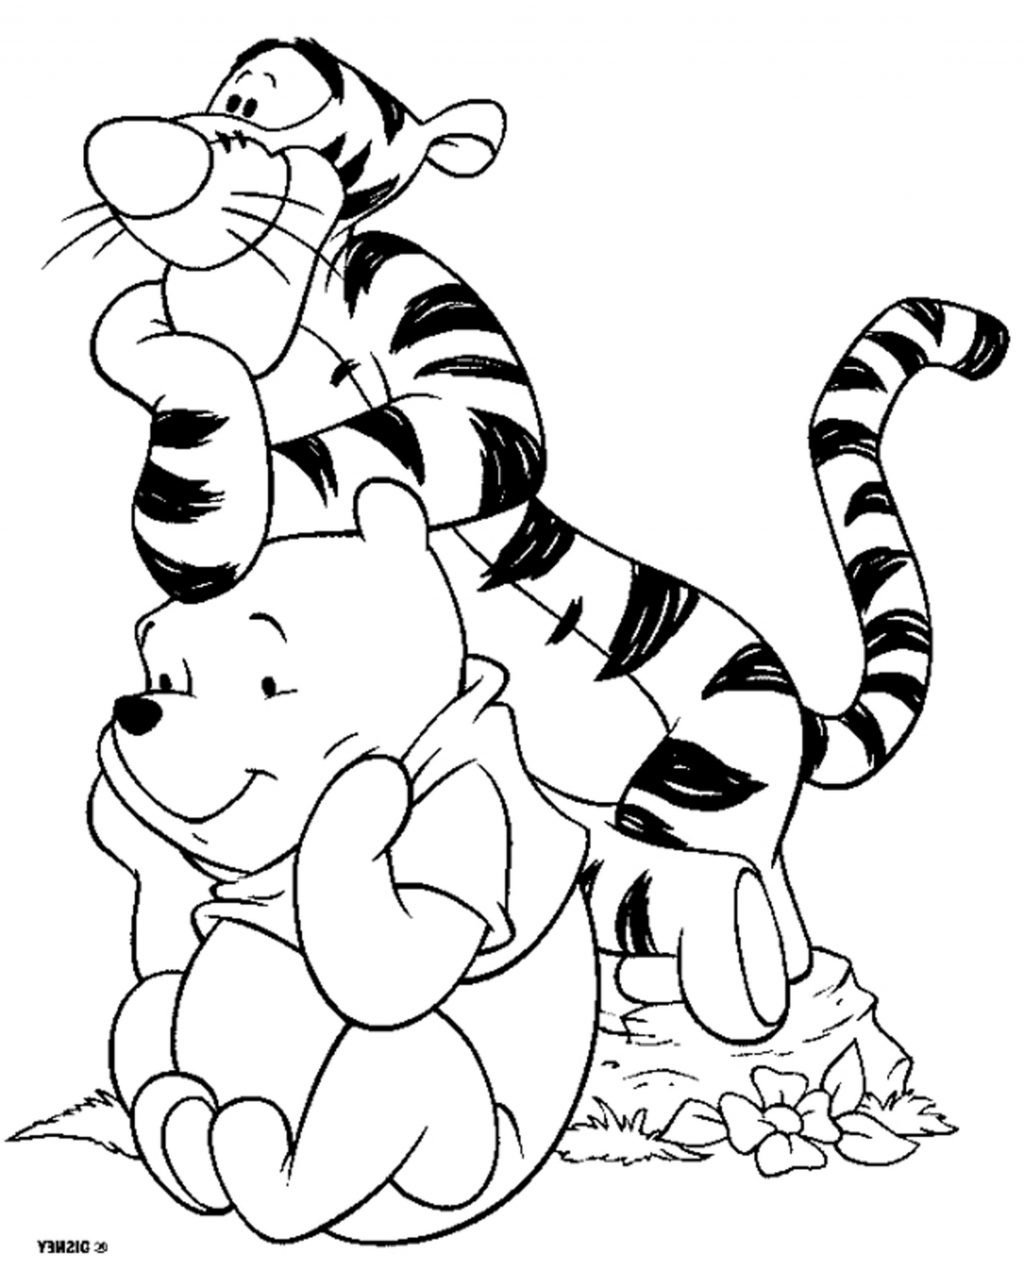 Coloring Pages For Elementary Students Coloring Pages Printable Coloring Pages For Year Olds Color